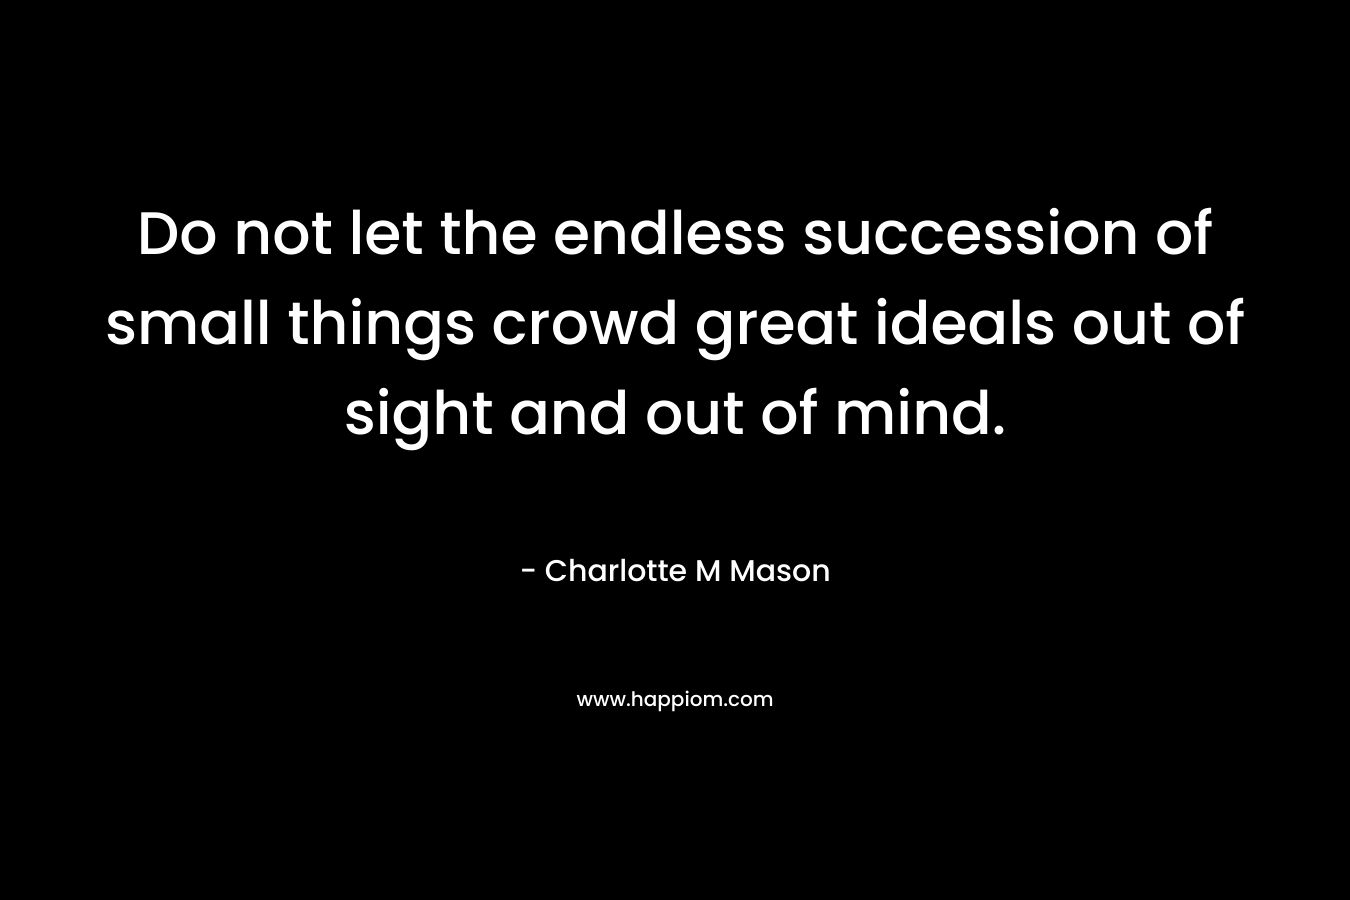 Do not let the endless succession of small things crowd great ideals out of sight and out of mind. – Charlotte M Mason